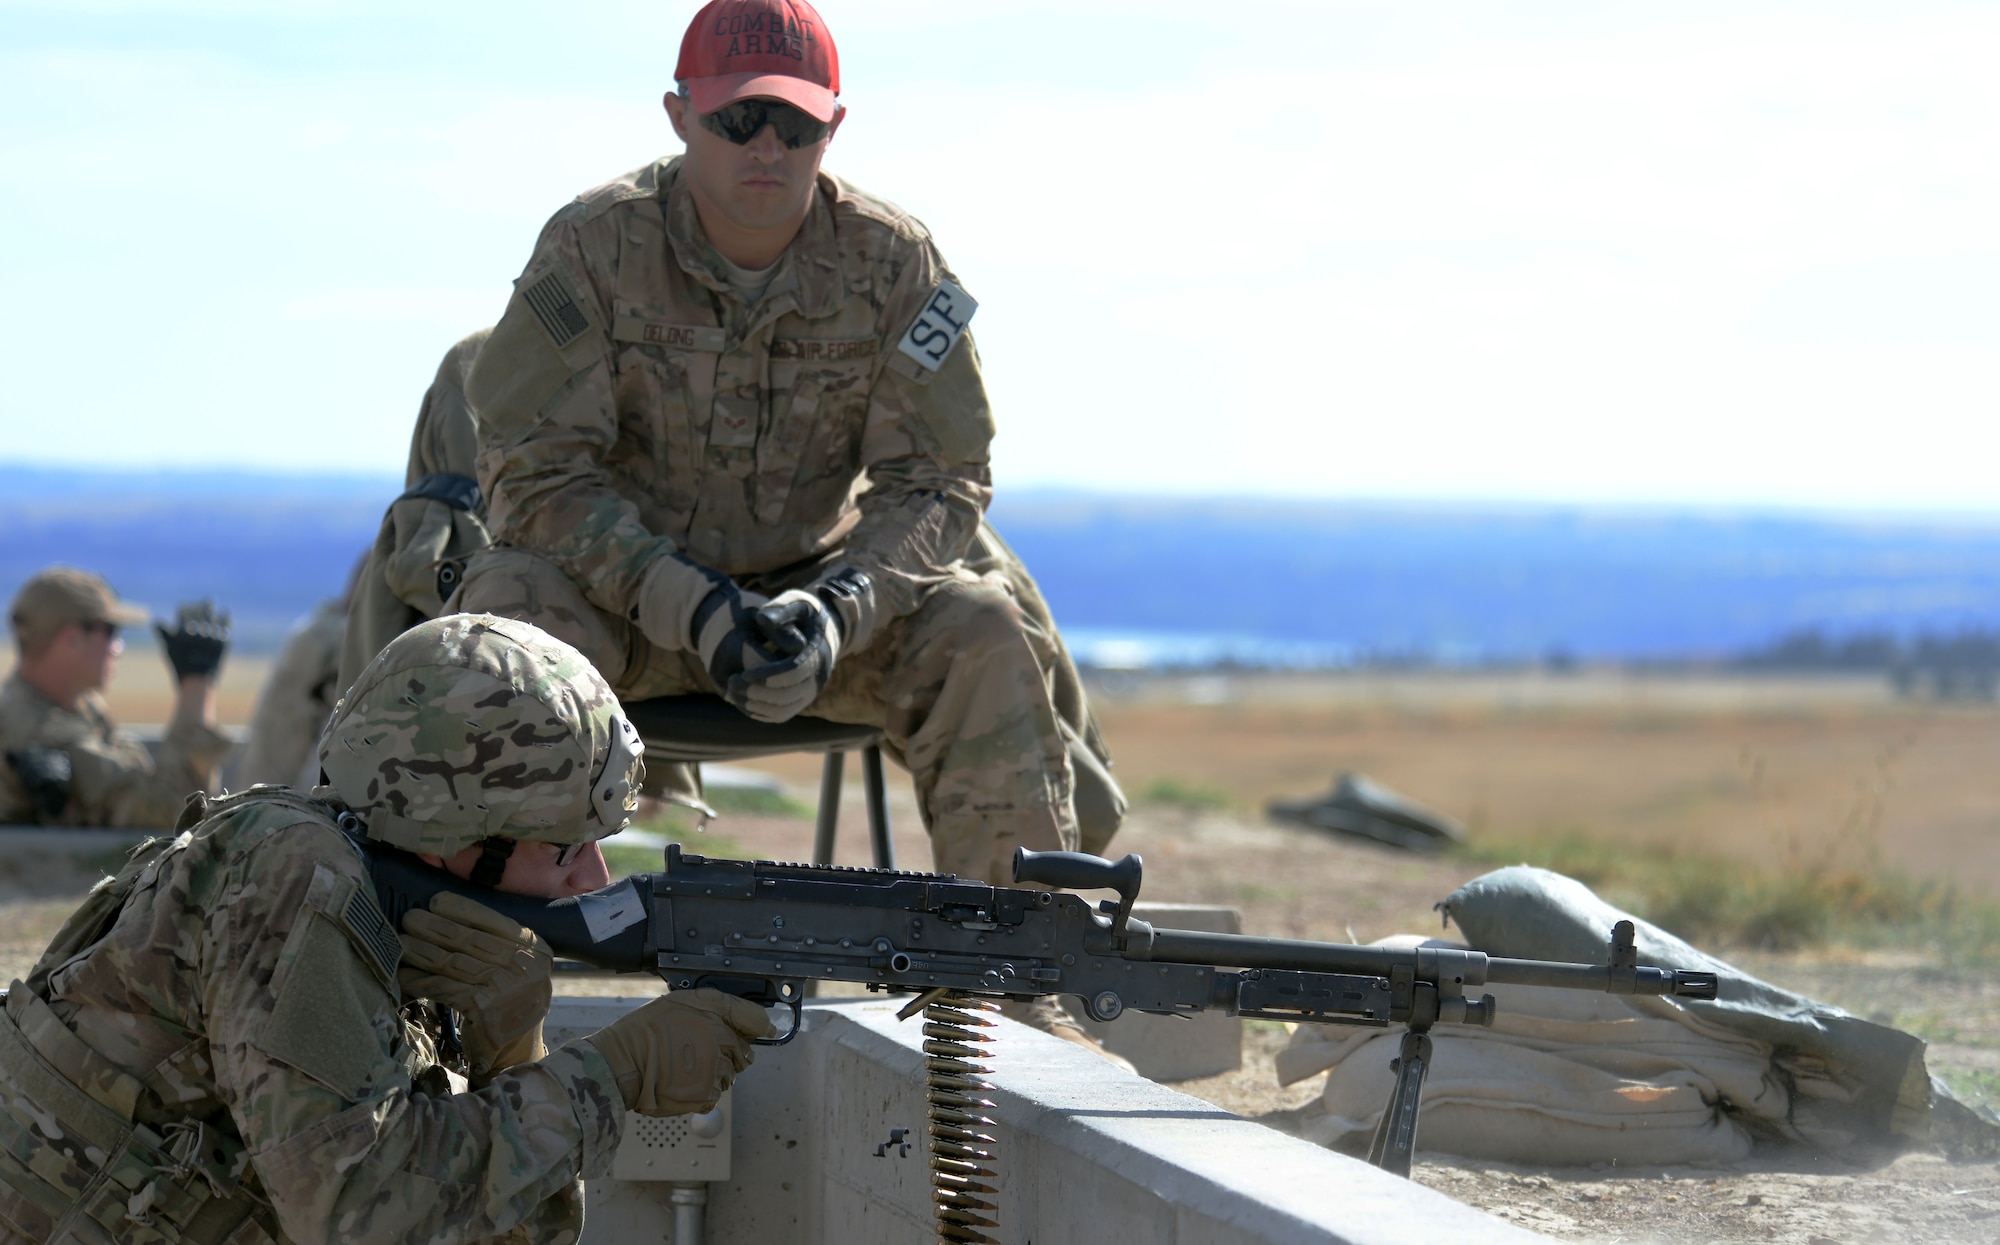 Staff Sgt. Richard Trimble, 90th Missile Wing, F.E. Warren Air Force Base, Wyo., fires an M-240 machine gun at a set of targets while Senior Airman Jeff Delong, 620th Ground Combat Training Squadron instructor, observes him Sept. 23, 2015, during a shooting portion of the 2015 Global Strike Challenge security forces competition on Camp Guernsey, Wyo. Ten security forces teams from eight Global Strike Command bases are competing to determine which base trains the best of the best. (U.S. Air Force photo by Senior Airman Brandon Valle)